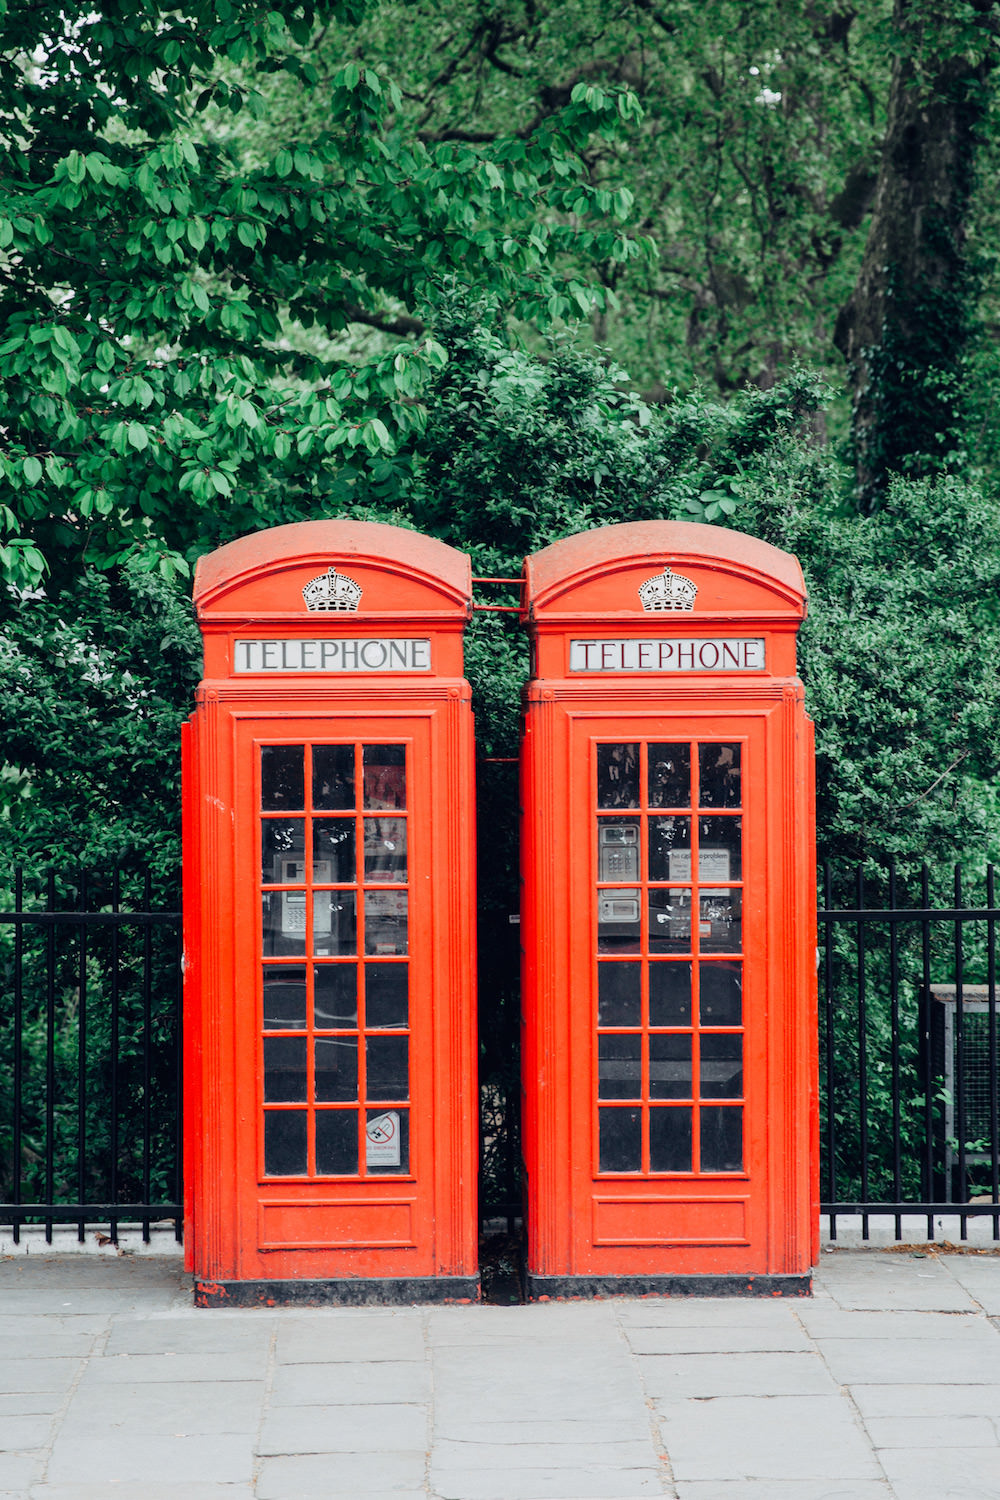 Caitlin Lindquist of the travel blog Dash of Darling shares a quick 24 hour travel guide to London.